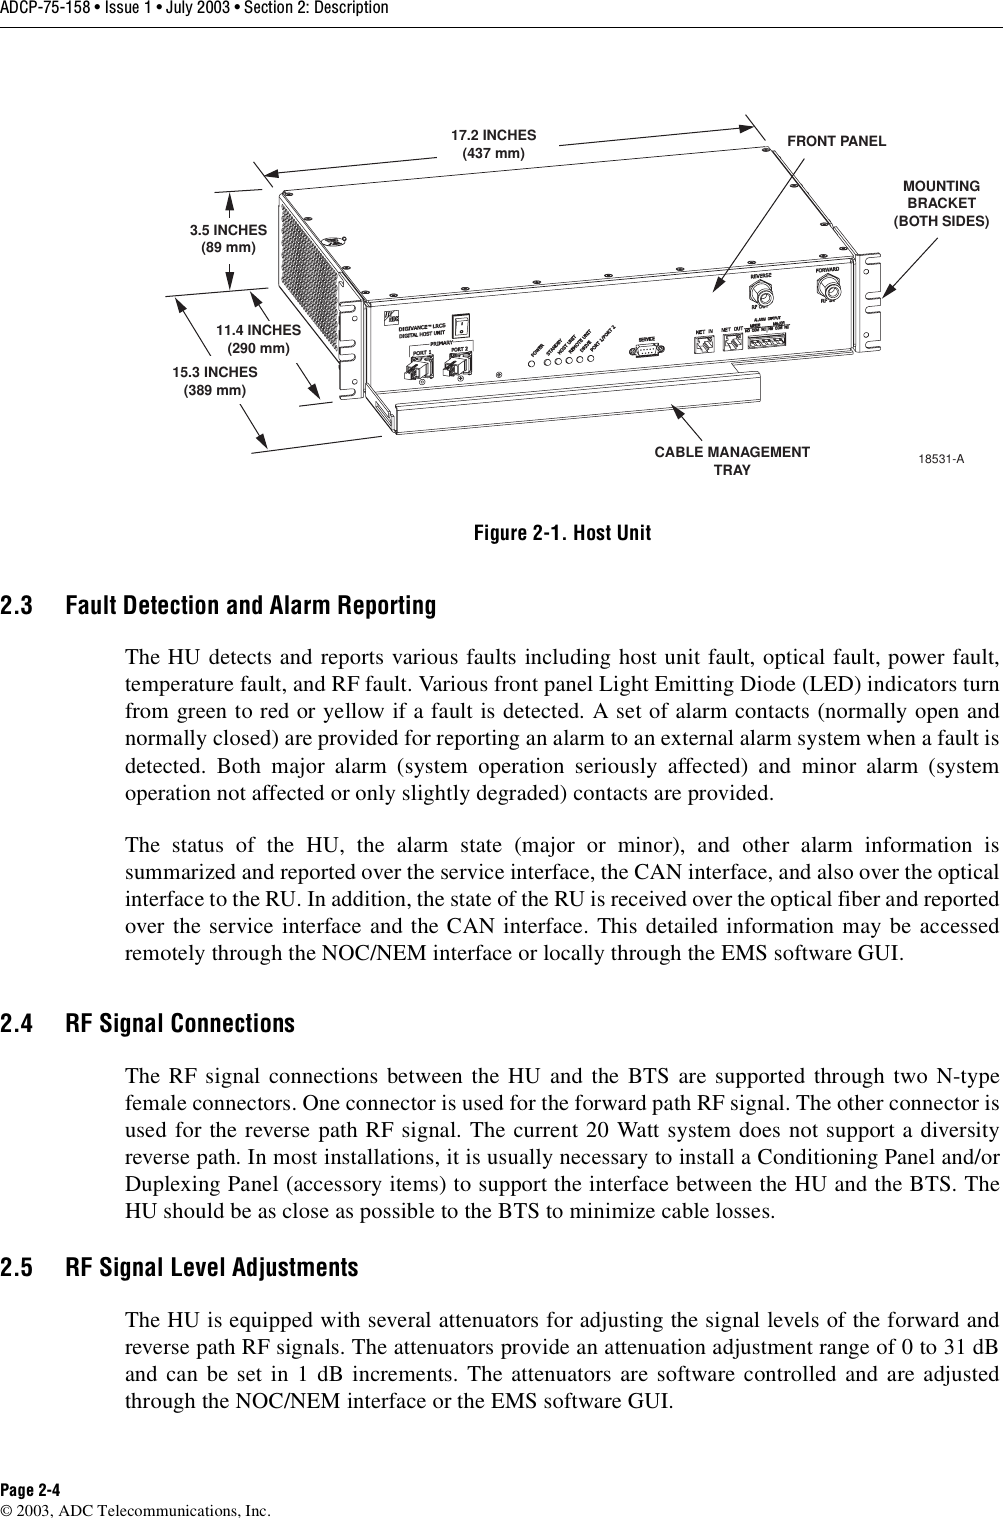 ADCP-75-158 • Issue 1 • July 2003 • Section 2: DescriptionPage 2-4© 2003, ADC Telecommunications, Inc.Figure 2-1. Host Unit2.3 Fault Detection and Alarm ReportingThe HU detects and reports various faults including host unit fault, optical fault, power fault,temperature fault, and RF fault. Various front panel Light Emitting Diode (LED) indicators turnfrom green to red or yellow if a fault is detected. A set of alarm contacts (normally open andnormally closed) are provided for reporting an alarm to an external alarm system when a fault isdetected. Both major alarm (system operation seriously affected) and minor alarm (systemoperation not affected or only slightly degraded) contacts are provided. The status of the HU, the alarm state (major or minor), and other alarm information issummarized and reported over the service interface, the CAN interface, and also over the opticalinterface to the RU. In addition, the state of the RU is received over the optical fiber and reportedover the service interface and the CAN interface. This detailed information may be accessedremotely through the NOC/NEM interface or locally through the EMS software GUI. 2.4 RF Signal ConnectionsThe RF signal connections between the HU and the BTS are supported through two N-typefemale connectors. One connector is used for the forward path RF signal. The other connector isused for the reverse path RF signal. The current 20 Watt system does not support a diversityreverse path. In most installations, it is usually necessary to install a Conditioning Panel and/orDuplexing Panel (accessory items) to support the interface between the HU and the BTS. TheHU should be as close as possible to the BTS to minimize cable losses. 2.5 RF Signal Level AdjustmentsThe HU is equipped with several attenuators for adjusting the signal levels of the forward andreverse path RF signals. The attenuators provide an attenuation adjustment range of 0 to 31 dBand can be set in 1 dB increments. The attenuators are software controlled and are adjustedthrough the NOC/NEM interface or the EMS software GUI. 17.2 INCHES(437 mm)3.5 INCHES(89 mm)11.4 INCHES(290 mm)15.3 INCHES(389 mm)FRONT PANELCABLE MANAGEMENTTRAYMOUNTINGBRACKET(BOTH SIDES)18531-A